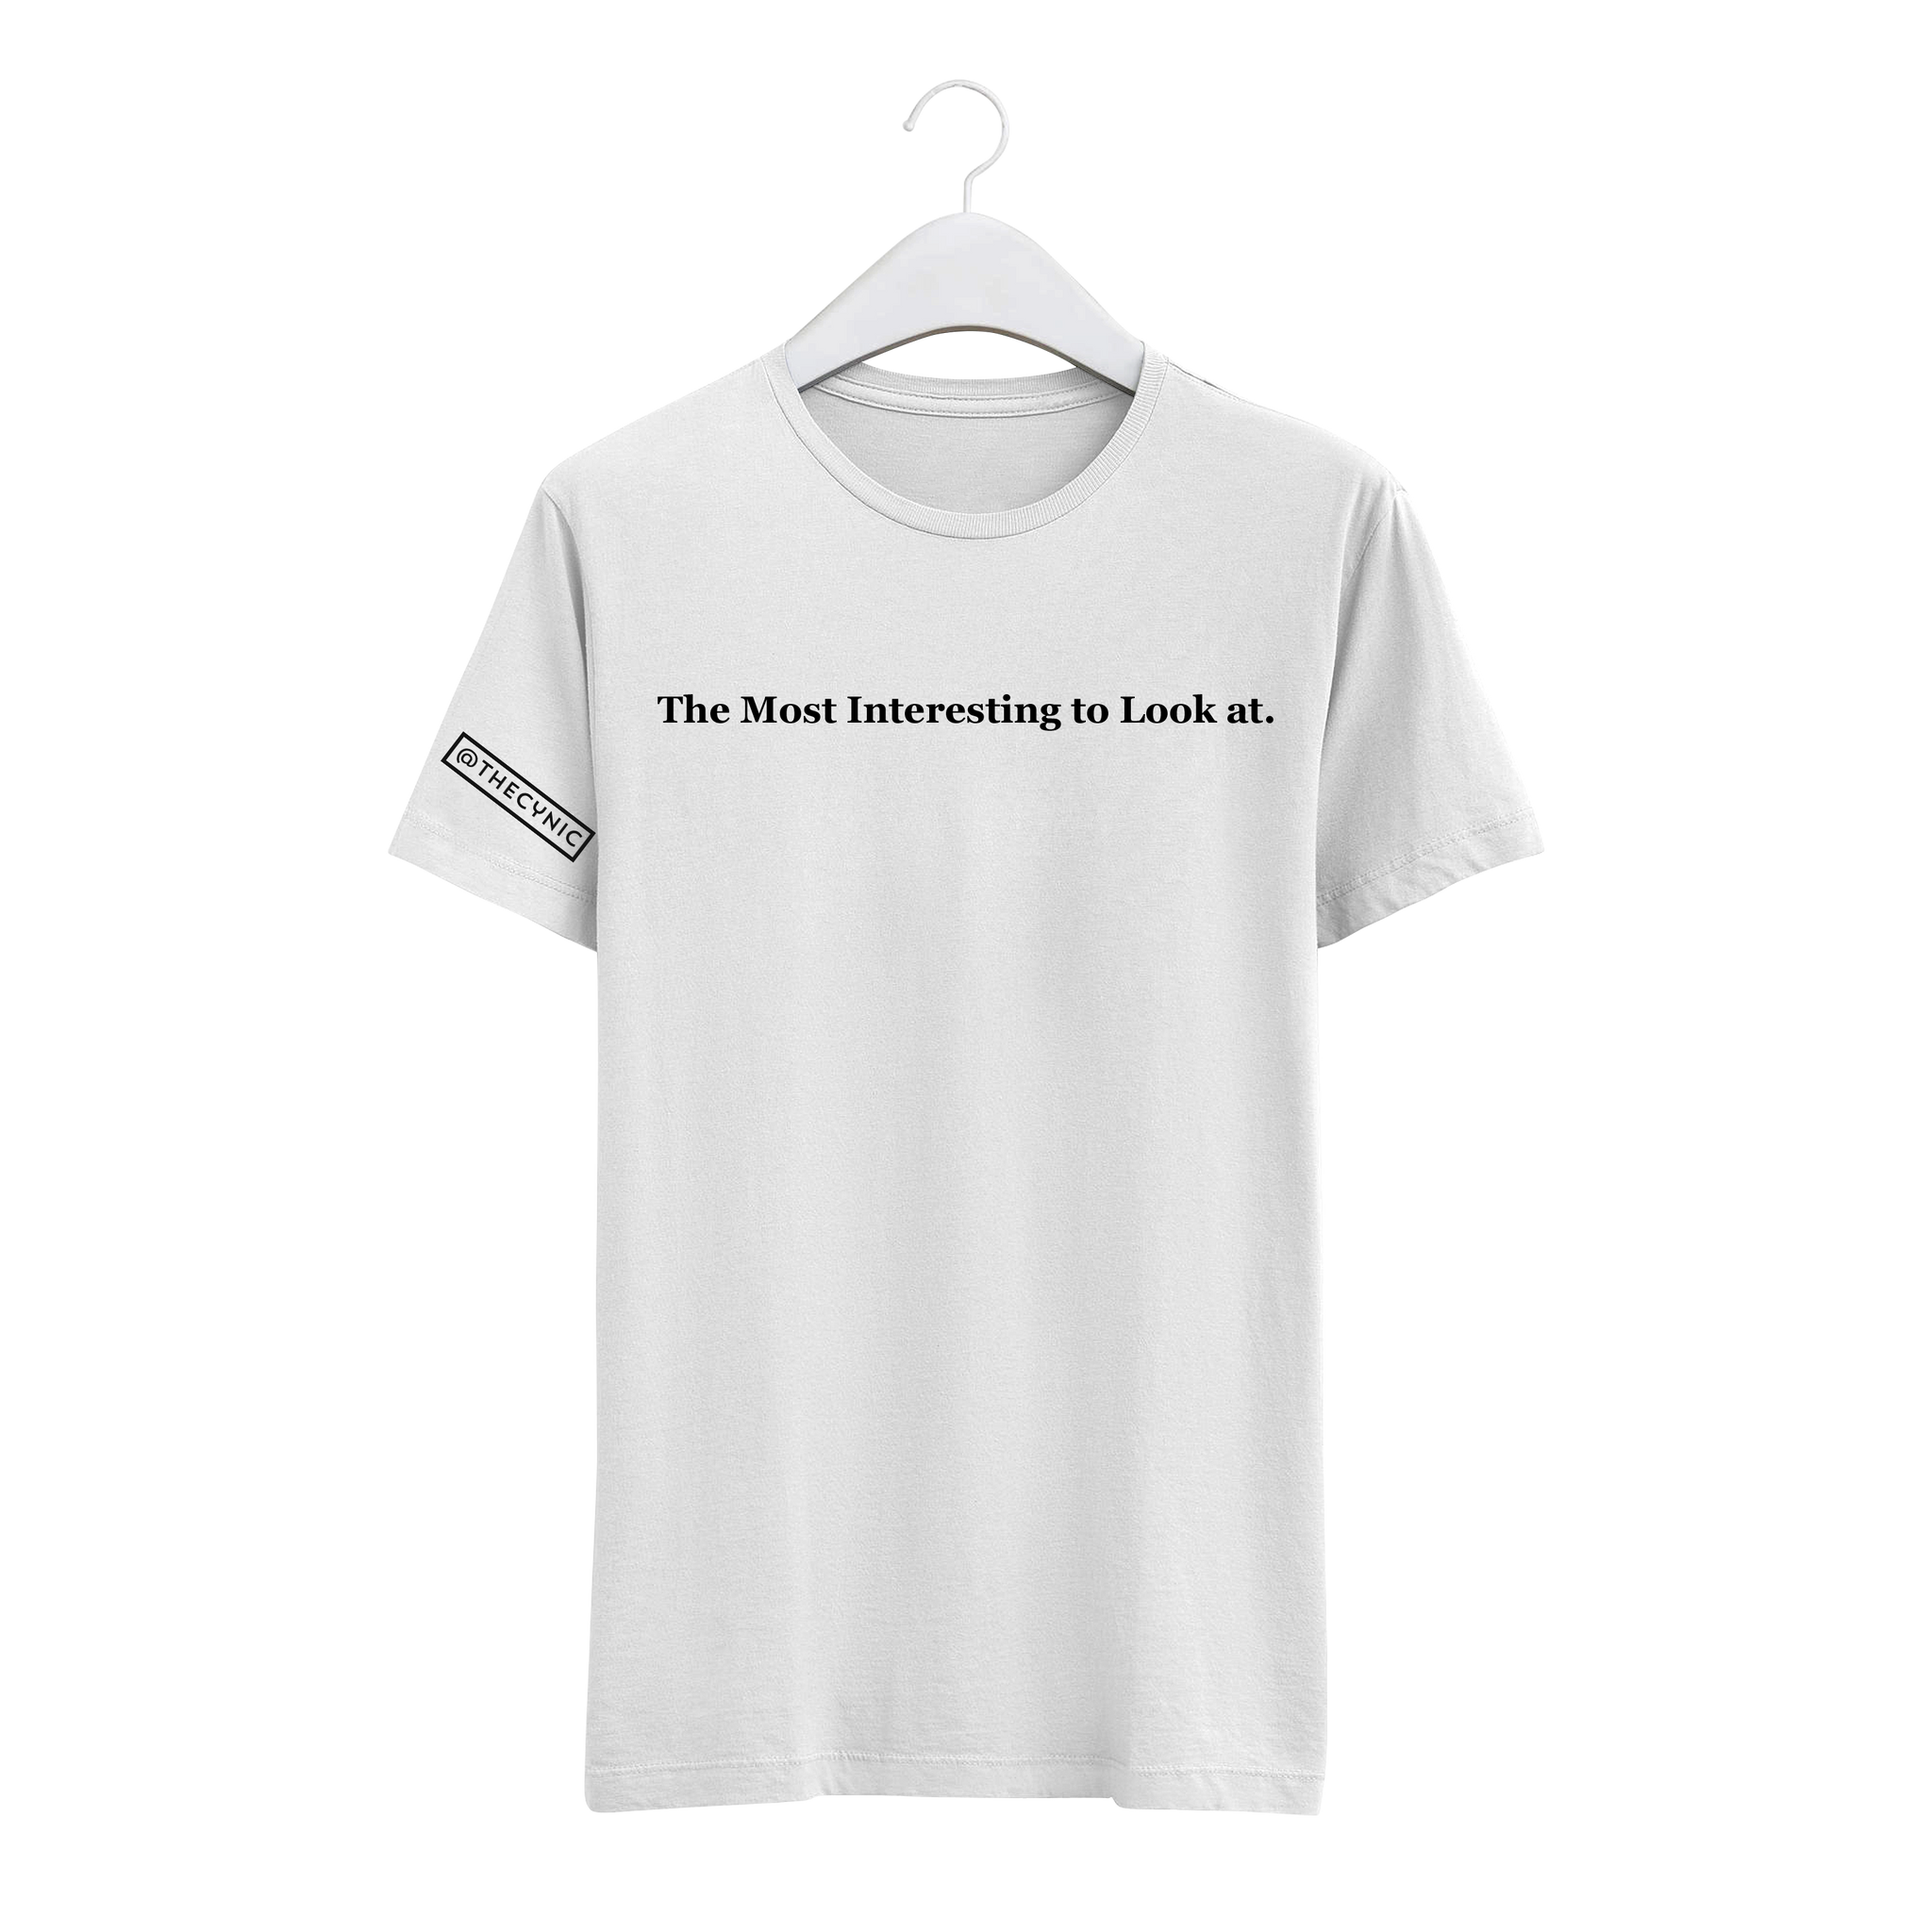 The Most Interesting to Look at. - Unisex Tee